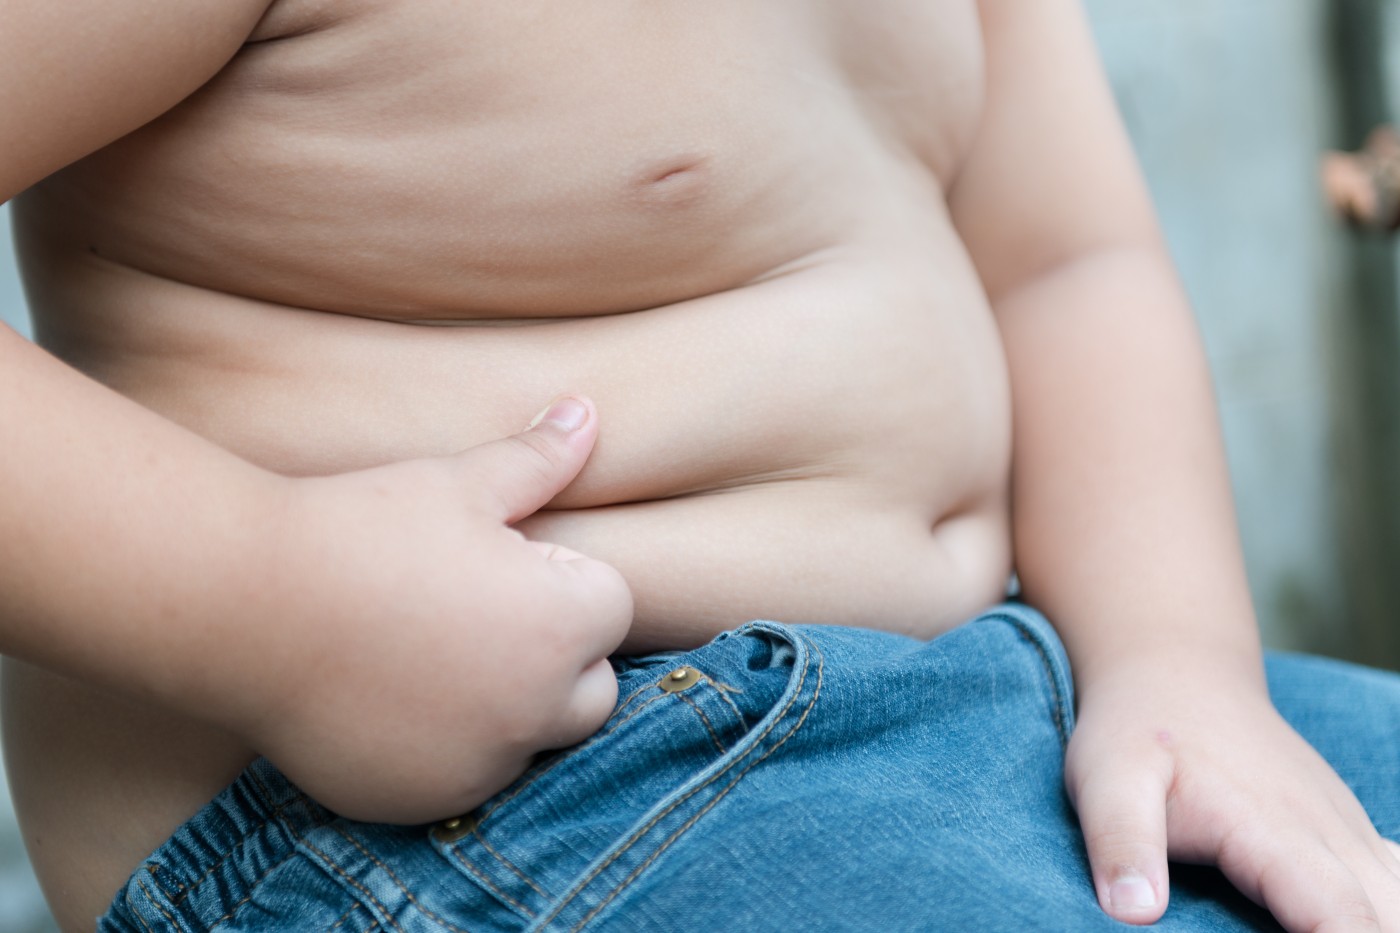 Researchers Suggest that the Role of Breastfeeding in Childhood Obesity Prevention is Not as Straightforward as Thought